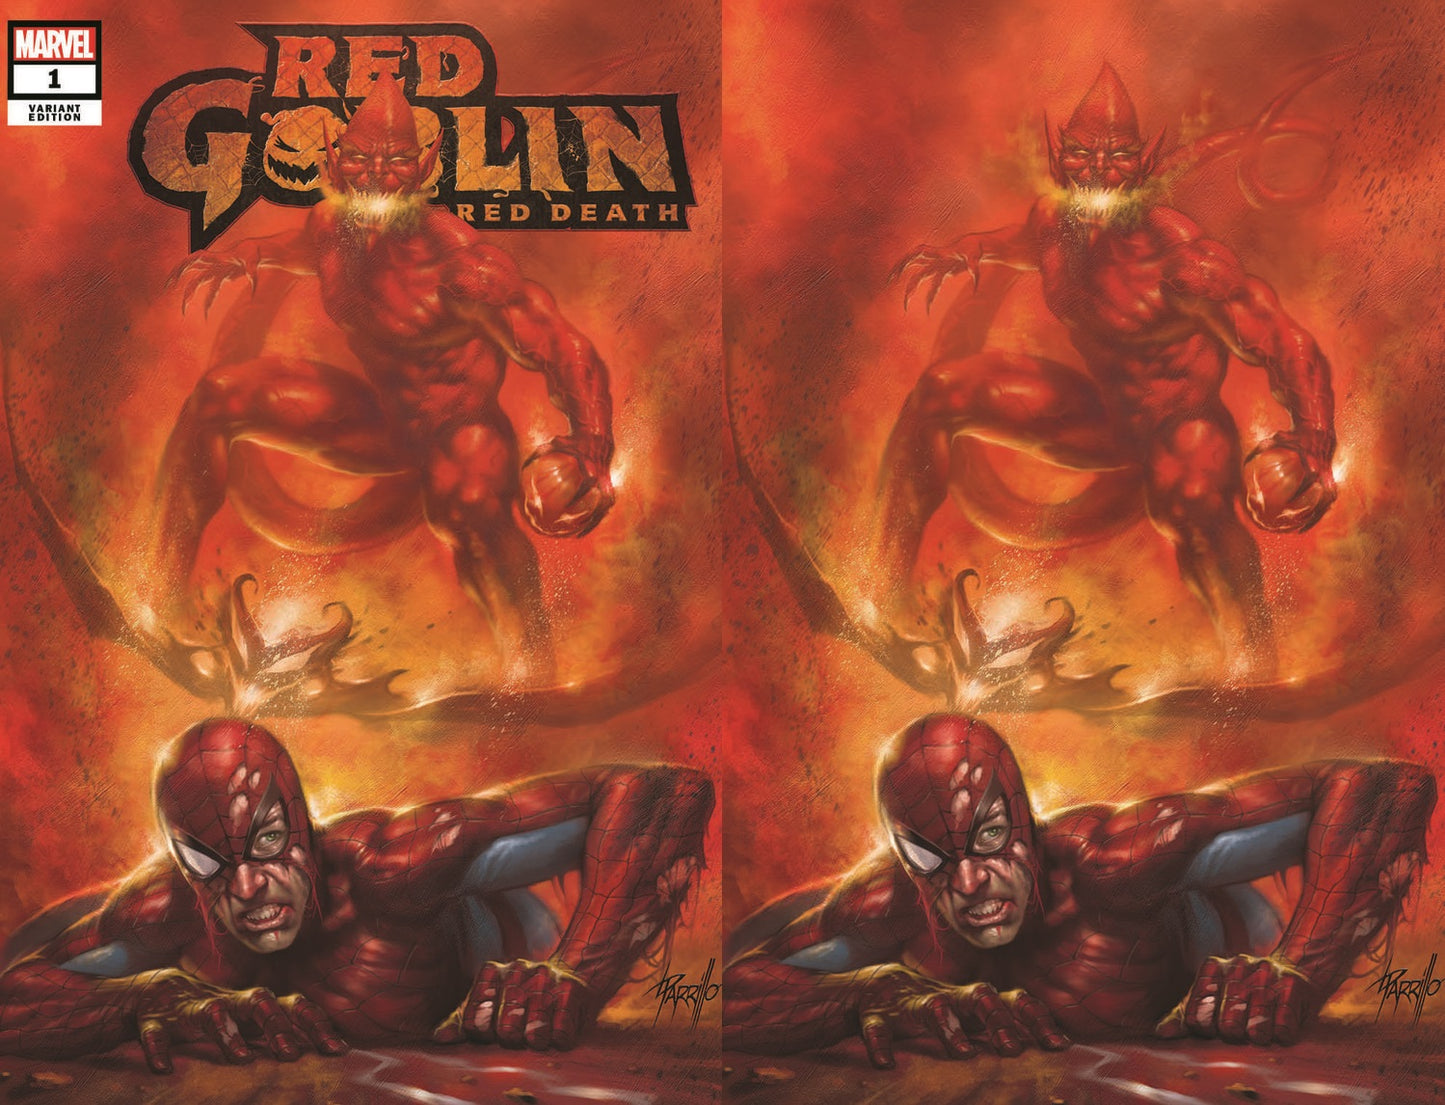 RED GOBLIN RED DEATH #1 LUCIO PARRILLO TRADE DRESS/VIRGIN VARIANT SETS LIMITED TO 600 SETS WITH NUMBERED COA